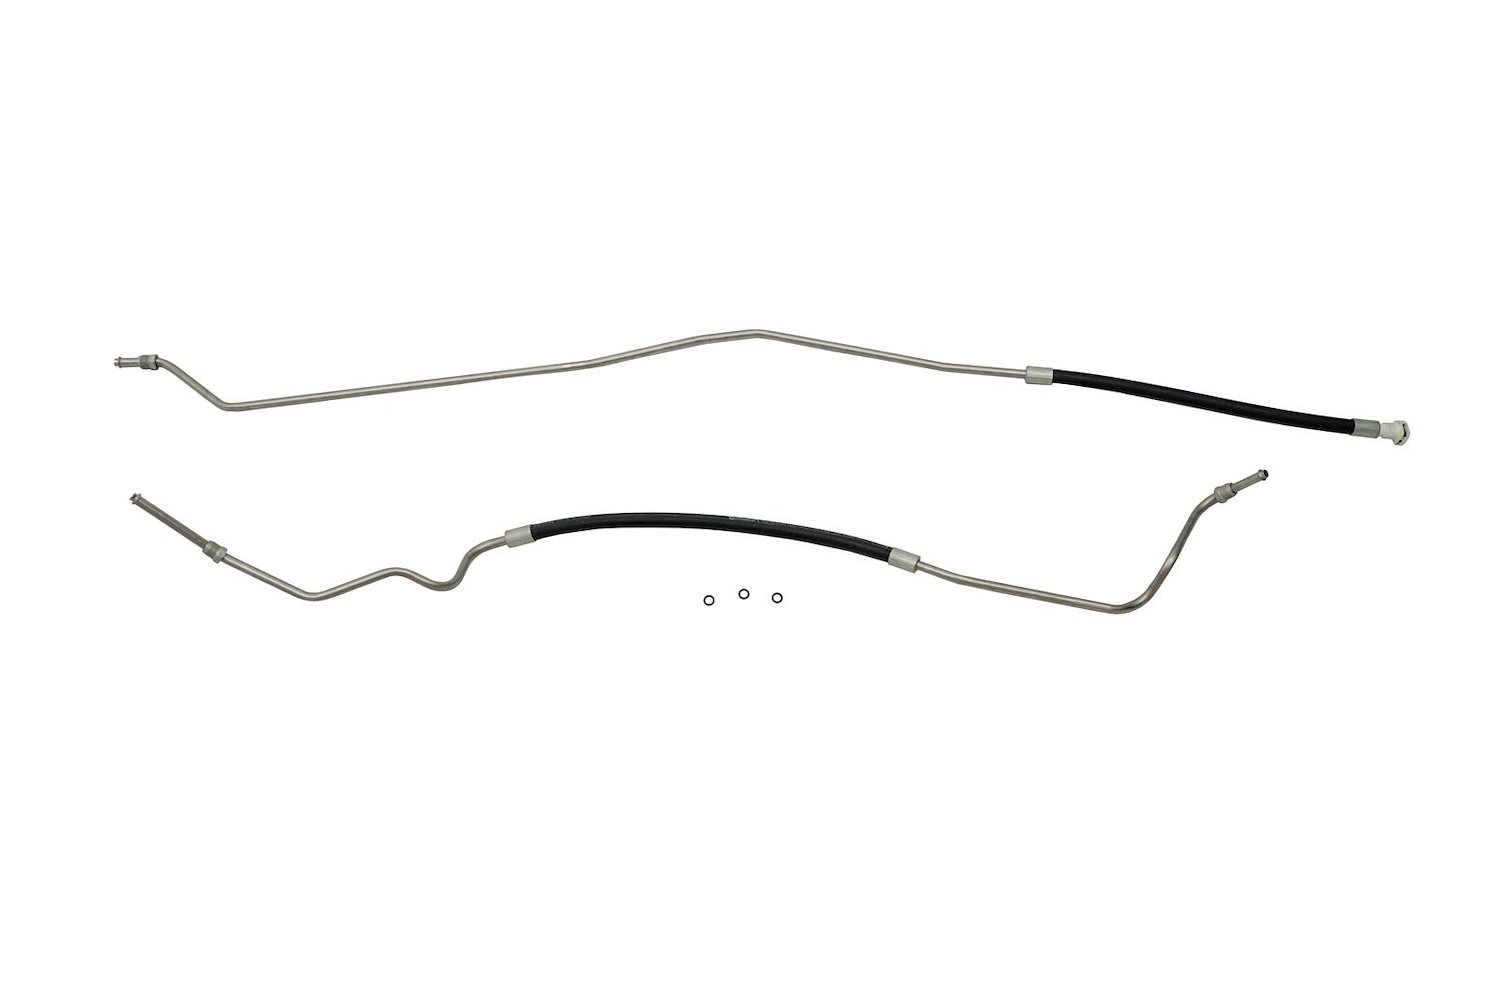 Chevy / GMC Pick Up Fuel Supply Line